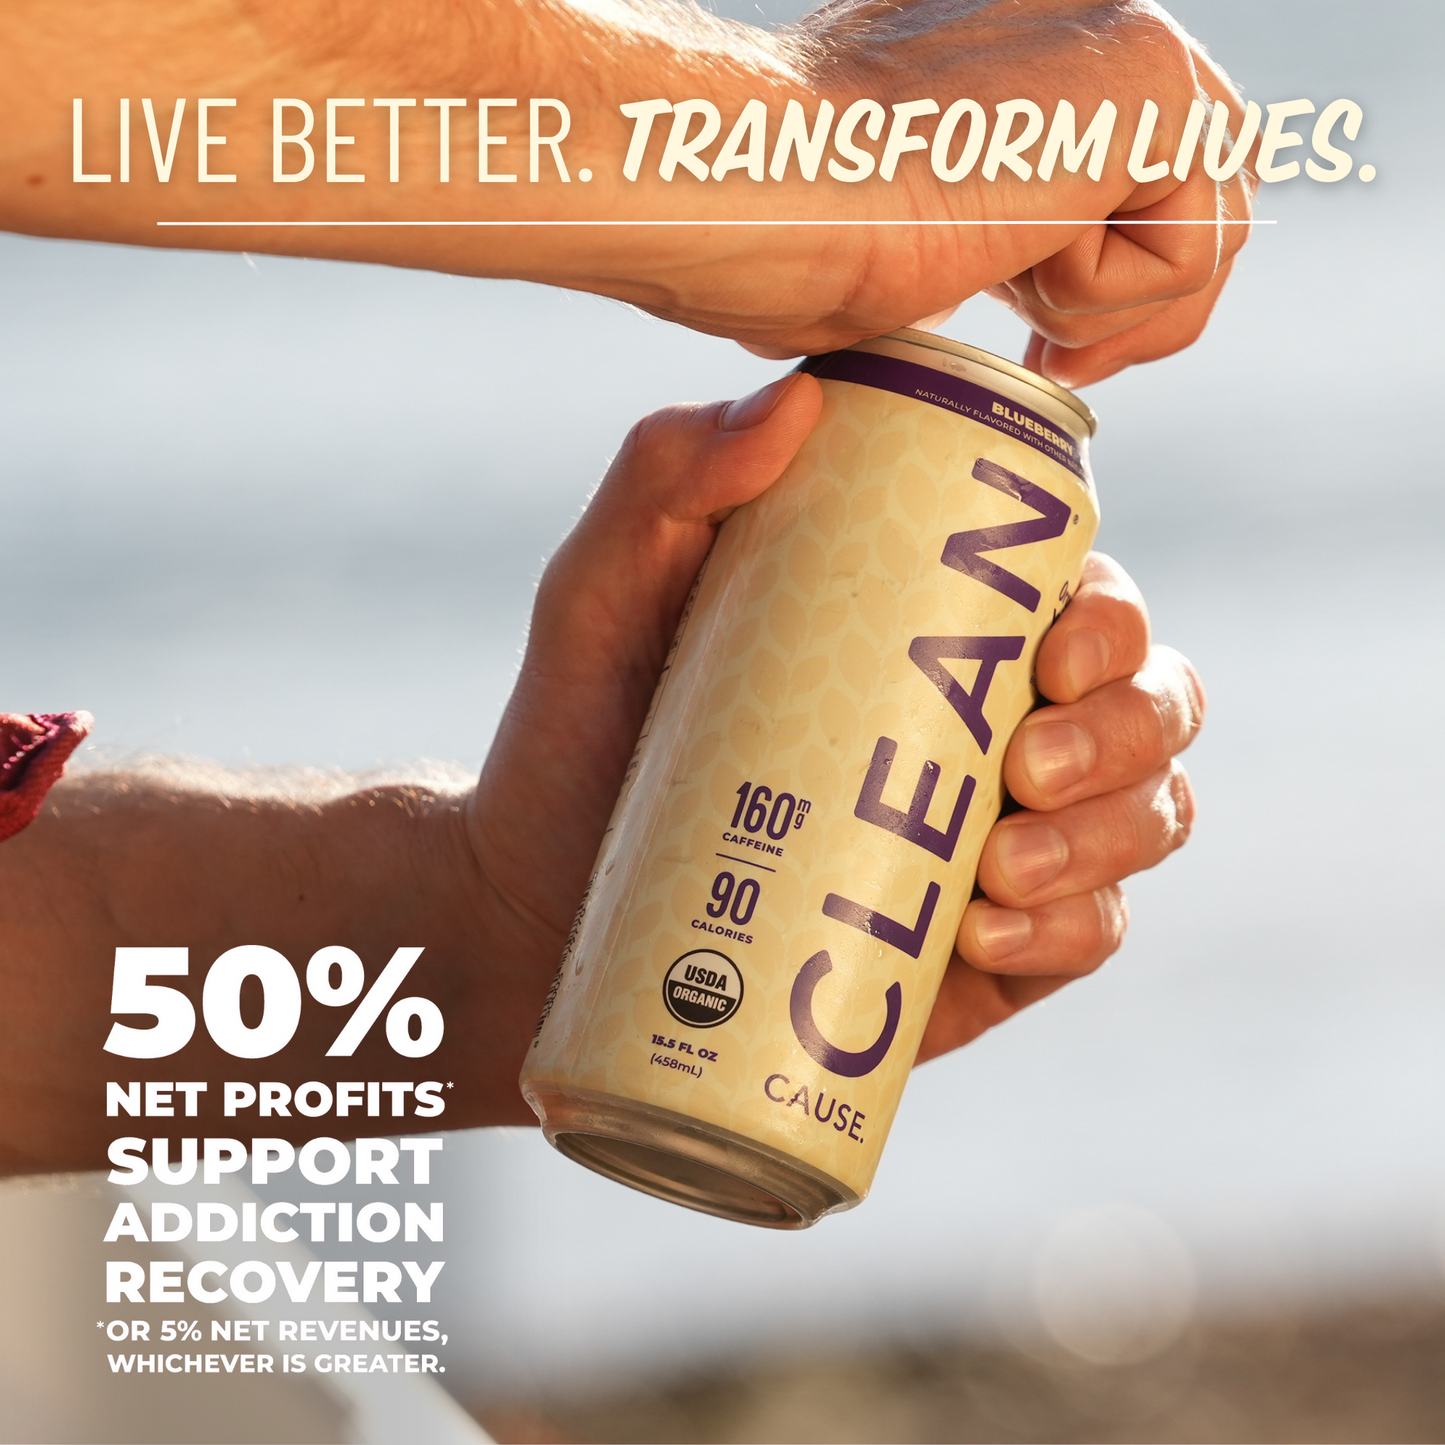 A close up of someone cracking open a CLEAN Cause Non-Carbonated Blueberry can with the slogan Live Better. Transform Lives. above her and 50% Net profits* support addiction recovery *or 5% net revenues, whichever is greater